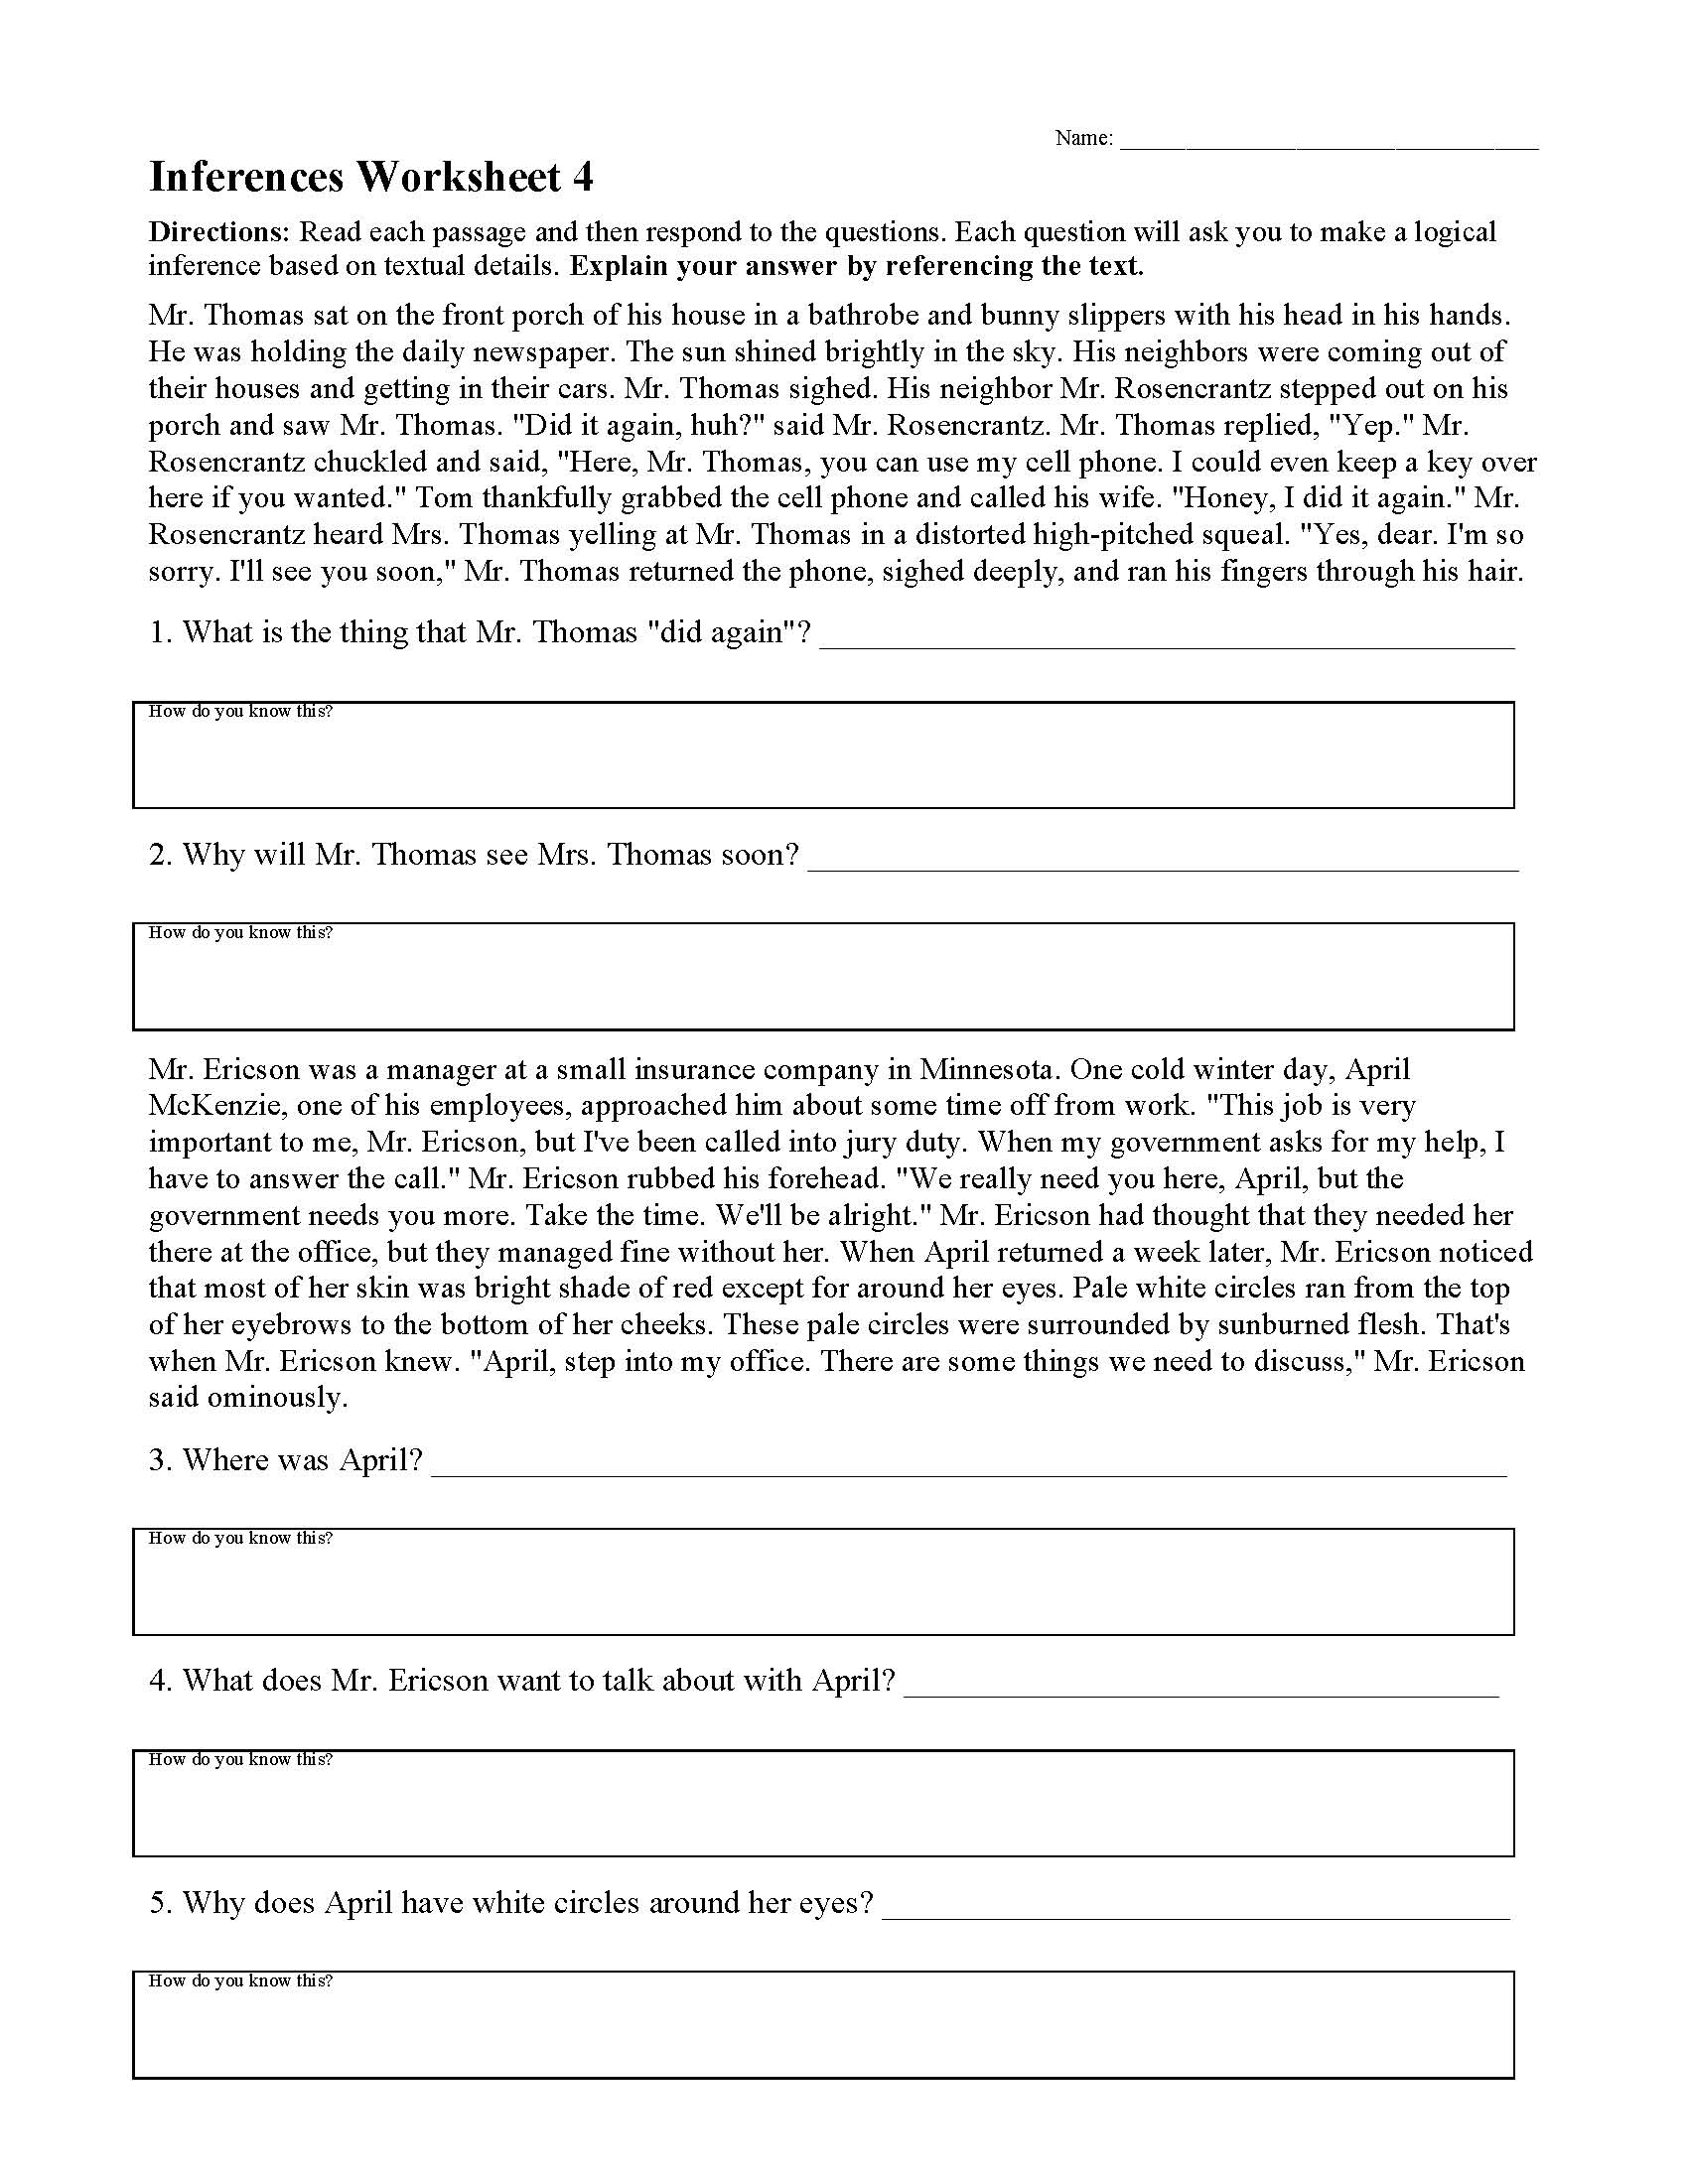 making-inferences-worksheet-answers